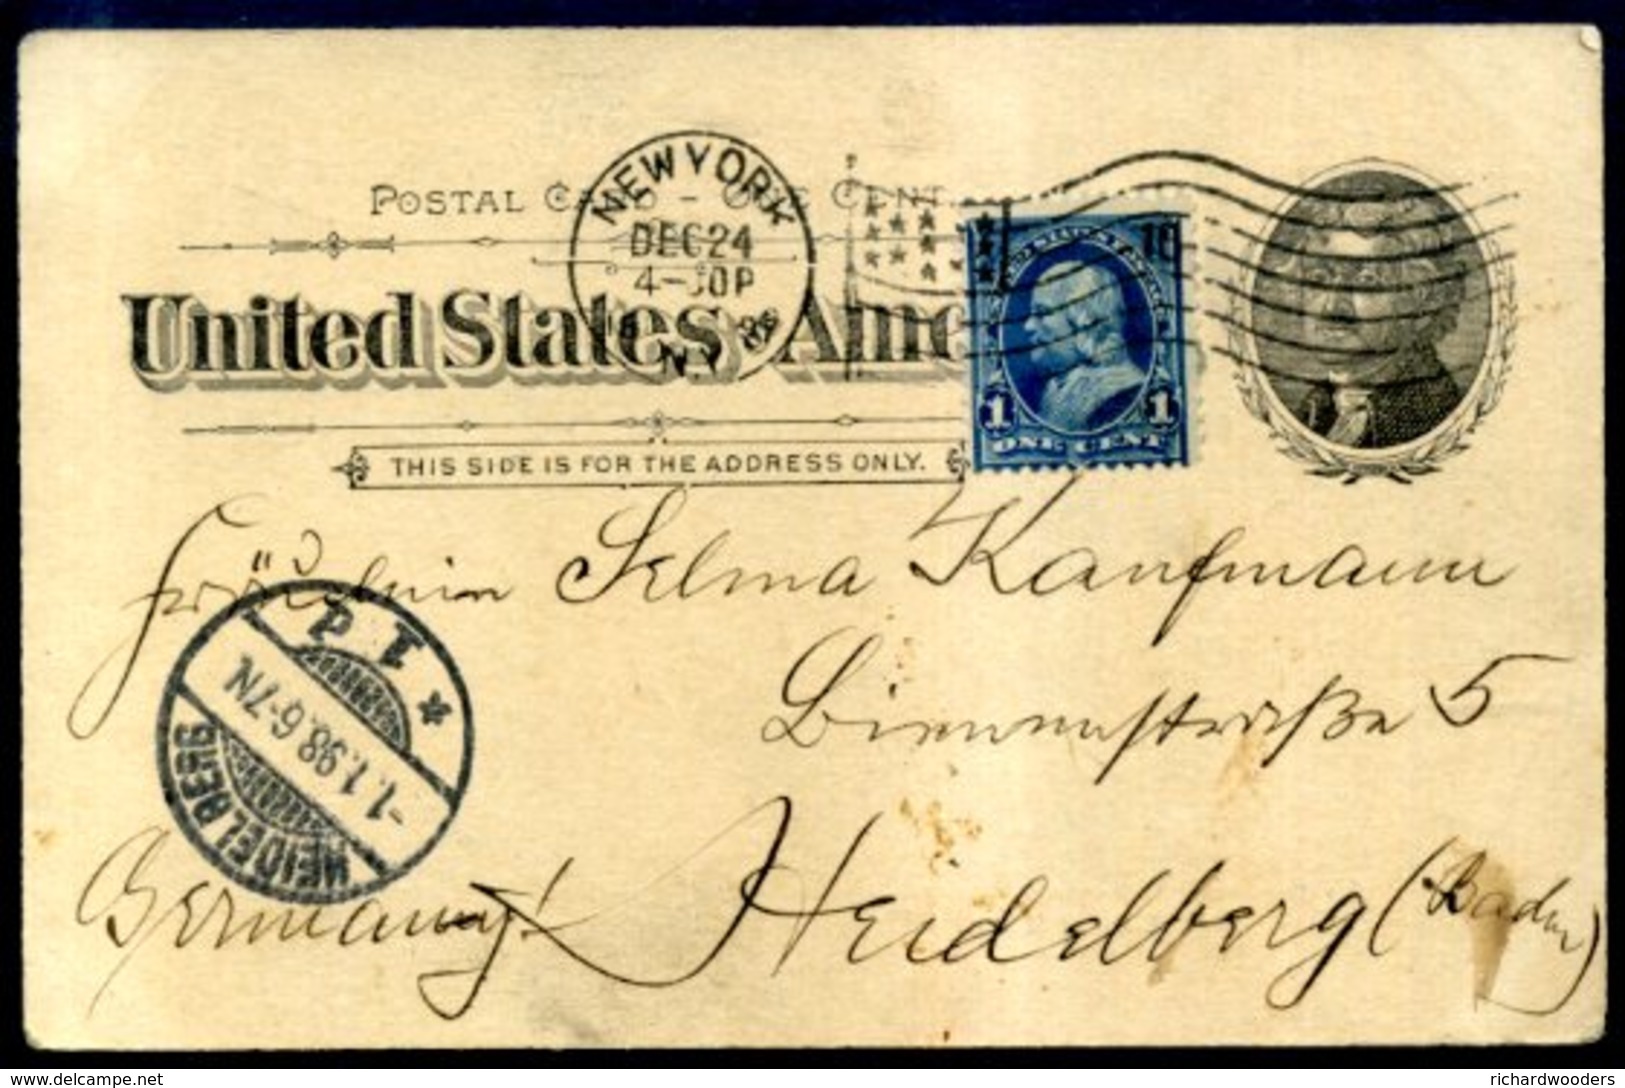 United States Of America - Covers - Pre 1900 - Covers & Documents